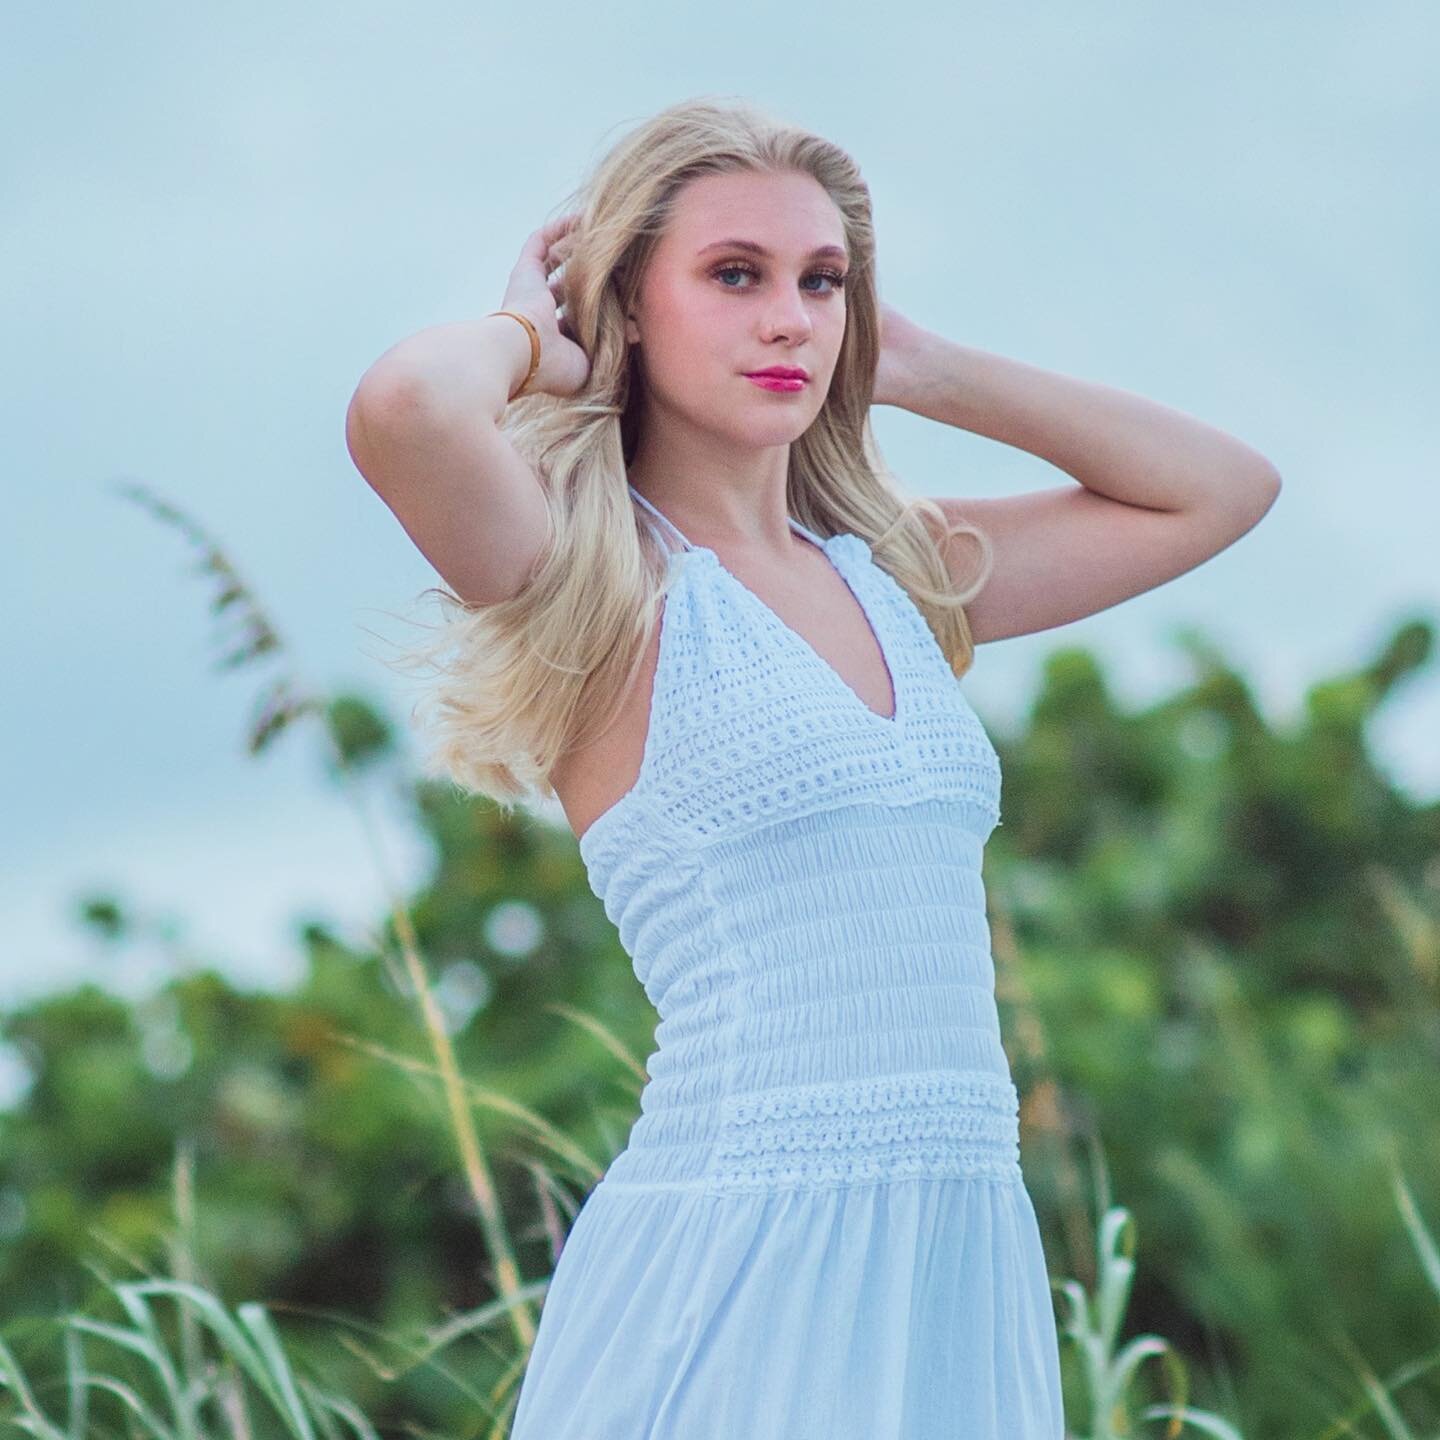 Meet Kaylee, Class of 2022, here in sunny South Florida, visiting from Iowa.&nbsp;&nbsp;We definitely had a wild time getting this session done - from worrying about rain storms from Tropical Storm Fred, to sending her to the wrong location, and then